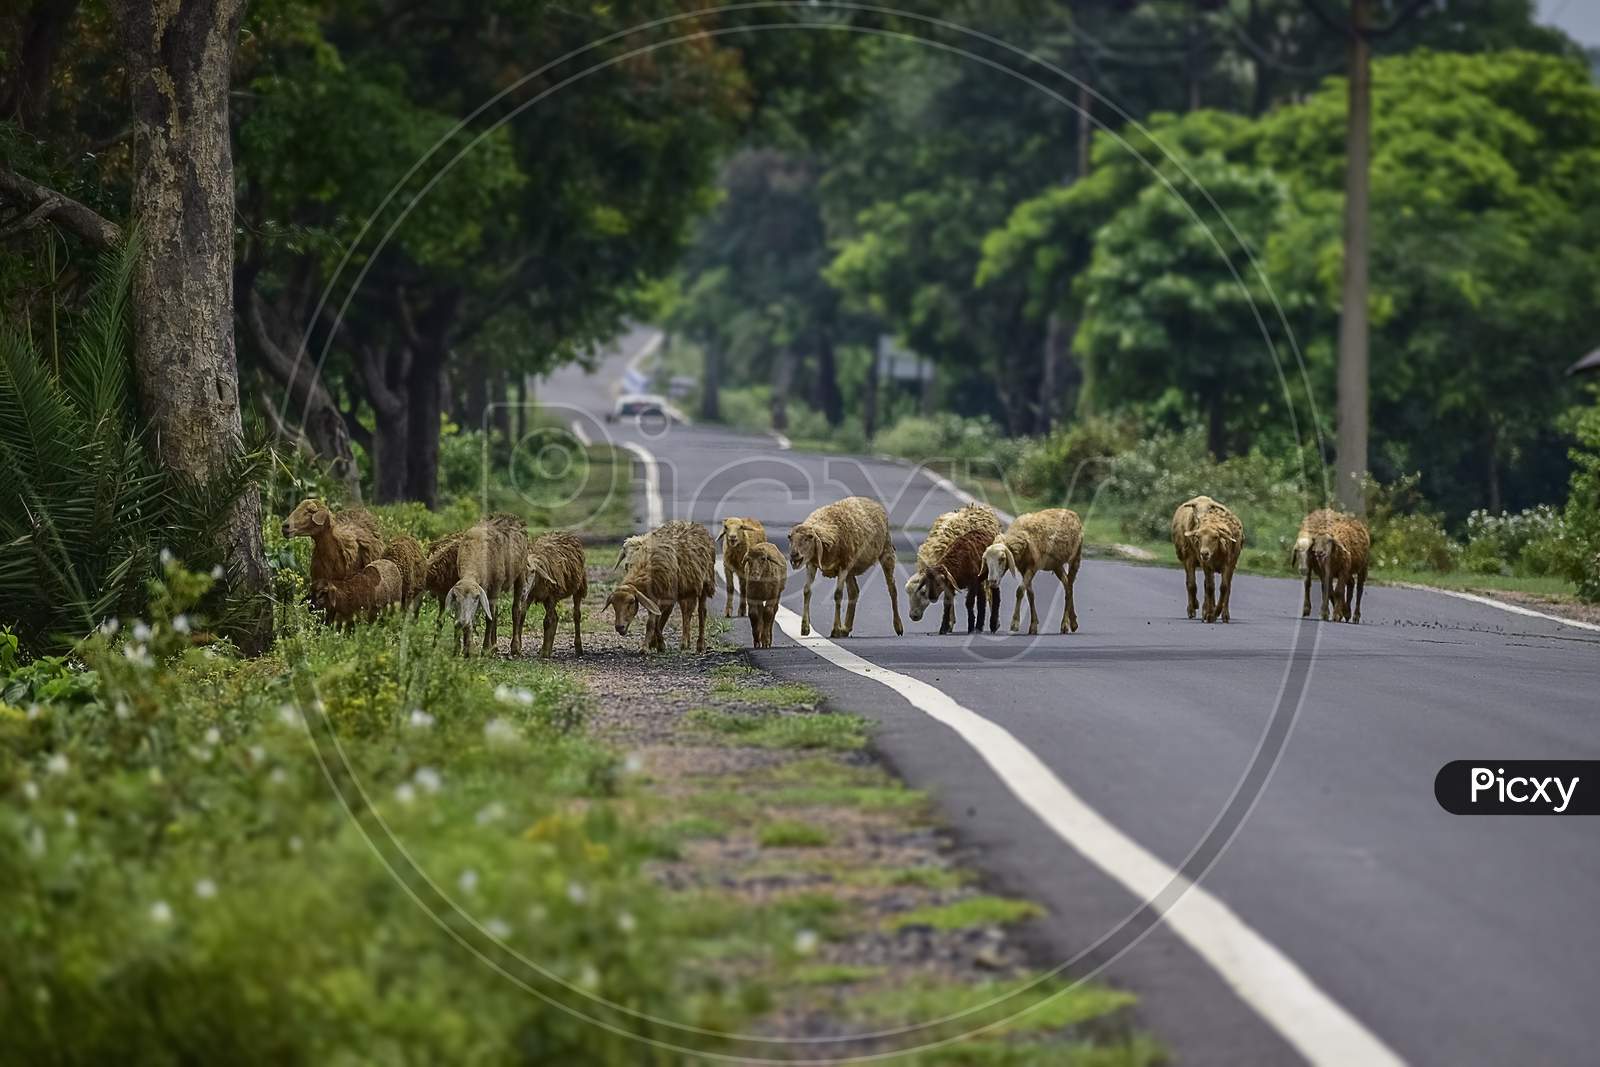 A Flock Of Sheep Crossing A Asfalt Or Tar Made Road In A Line Arranged Following The Leader One. India. Asia. 2019.